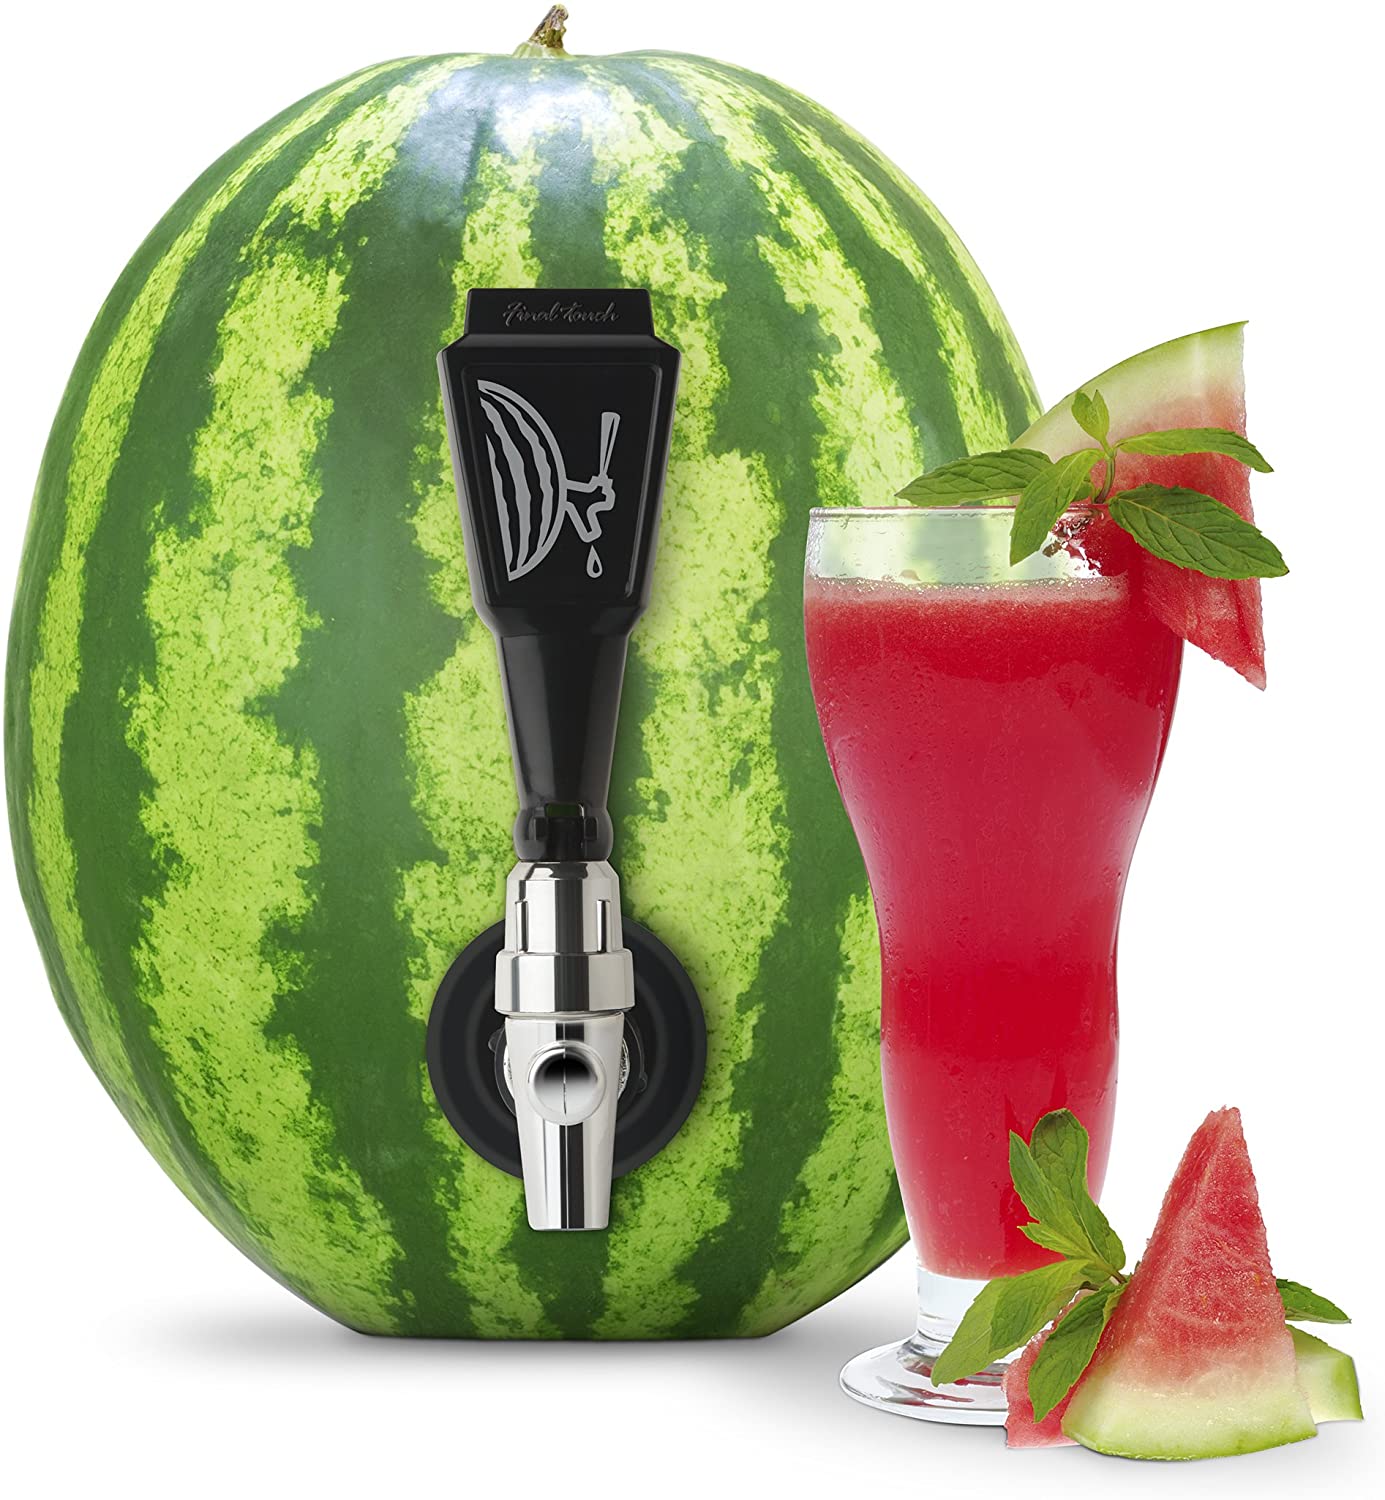 the watermelon keg tapping kit illustrated in a watermelon with a glass filled on a white background